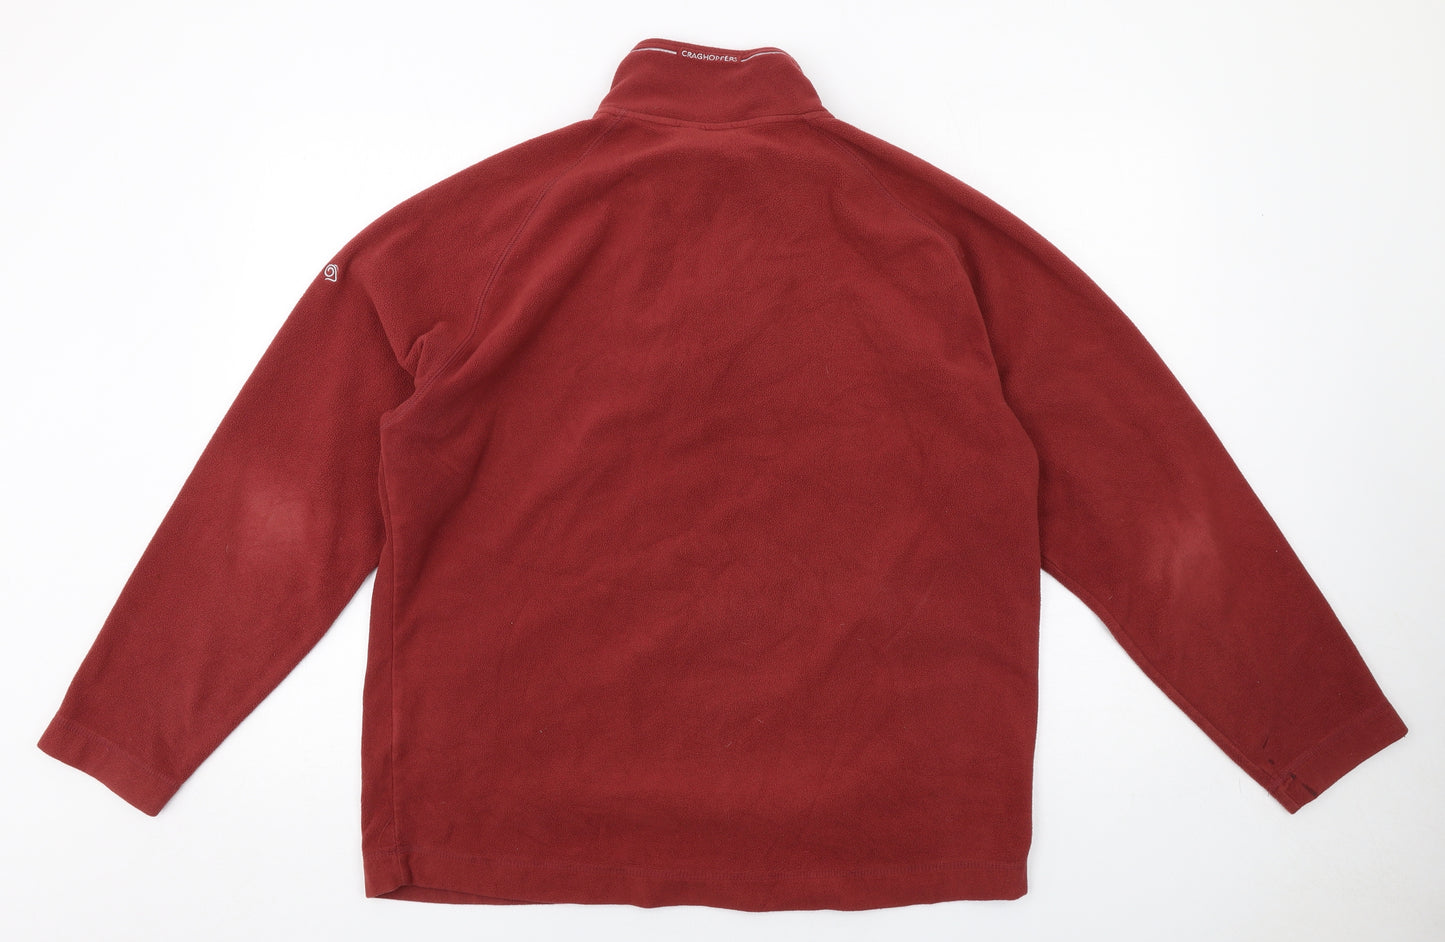 Craghoppers Mens Red Polyester Henley Sweatshirt Size XL